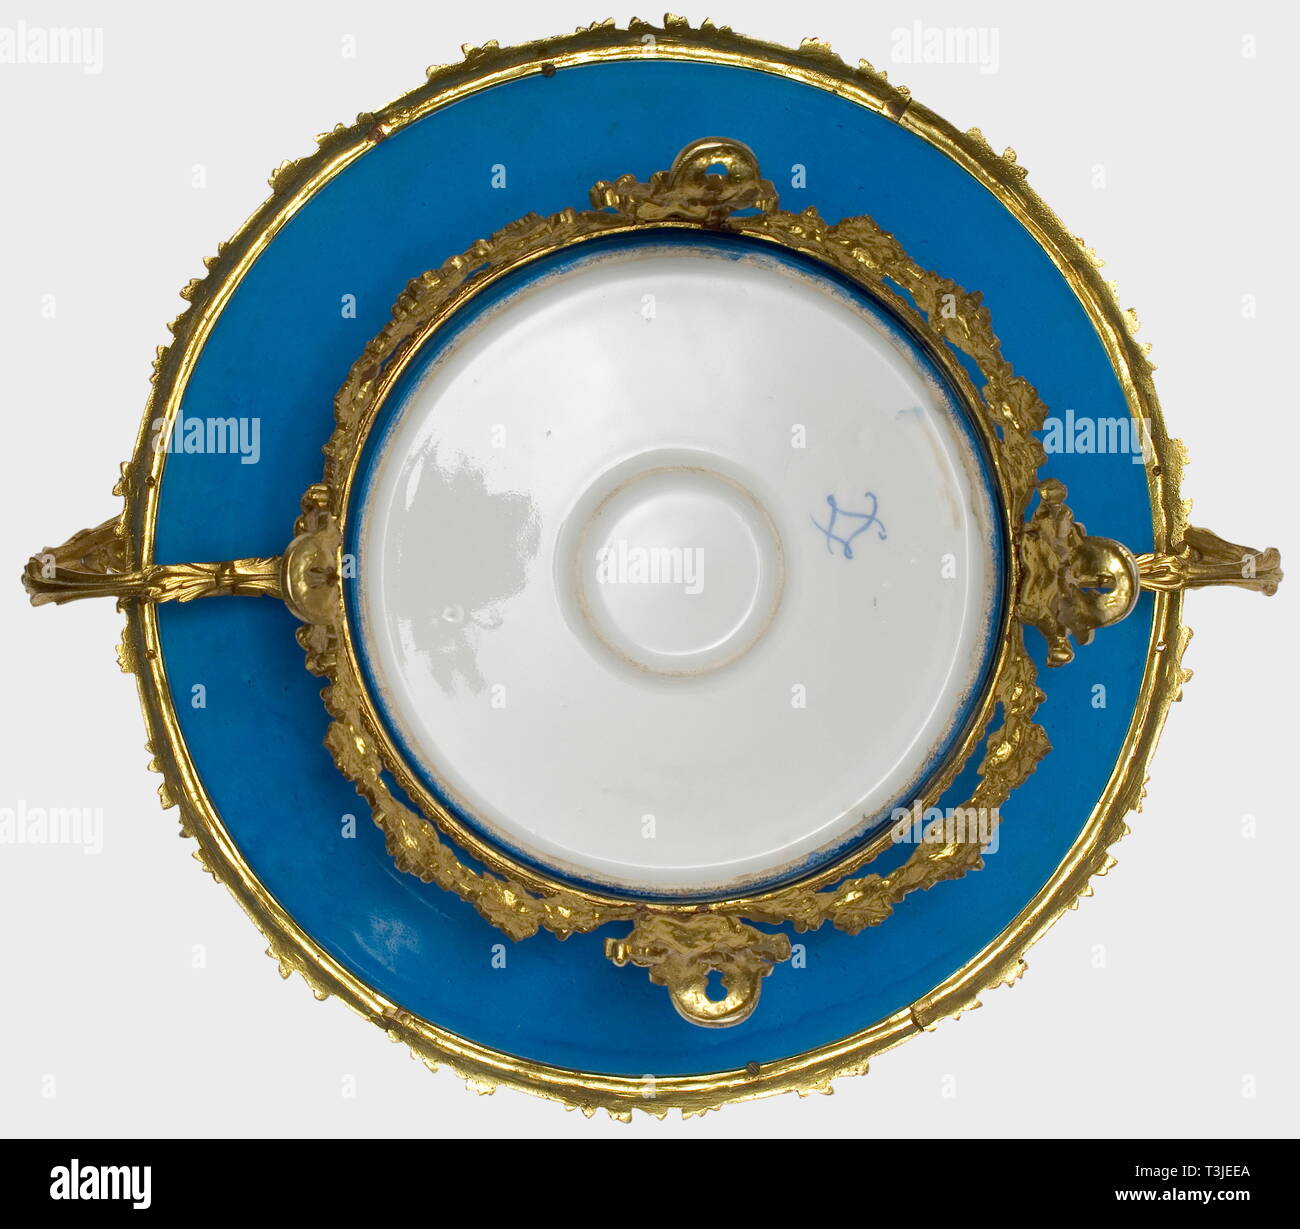 A large porcelain dish, Sèvres Factory, 19th century Sèvres-blue glazed porcelain with a hand-painted lovers' scene in the centre, the border has gilt and etched leafy vines and three cartouches with hand painted floral decoration. A reverse 'S' mark in underglaze blue on the bottom. Openwork support of gilt bronze with grape and grape leaf decoration on the four footed frame as well as floral garlands on the plate rim and the two handles. Diameter ca. 37 cm. Height ca. 20 cm. At the latest, porcelain from the French Sèvres Factory enjoyed great , Additional-Rights-Clearance-Info-Not-Available Stock Photo